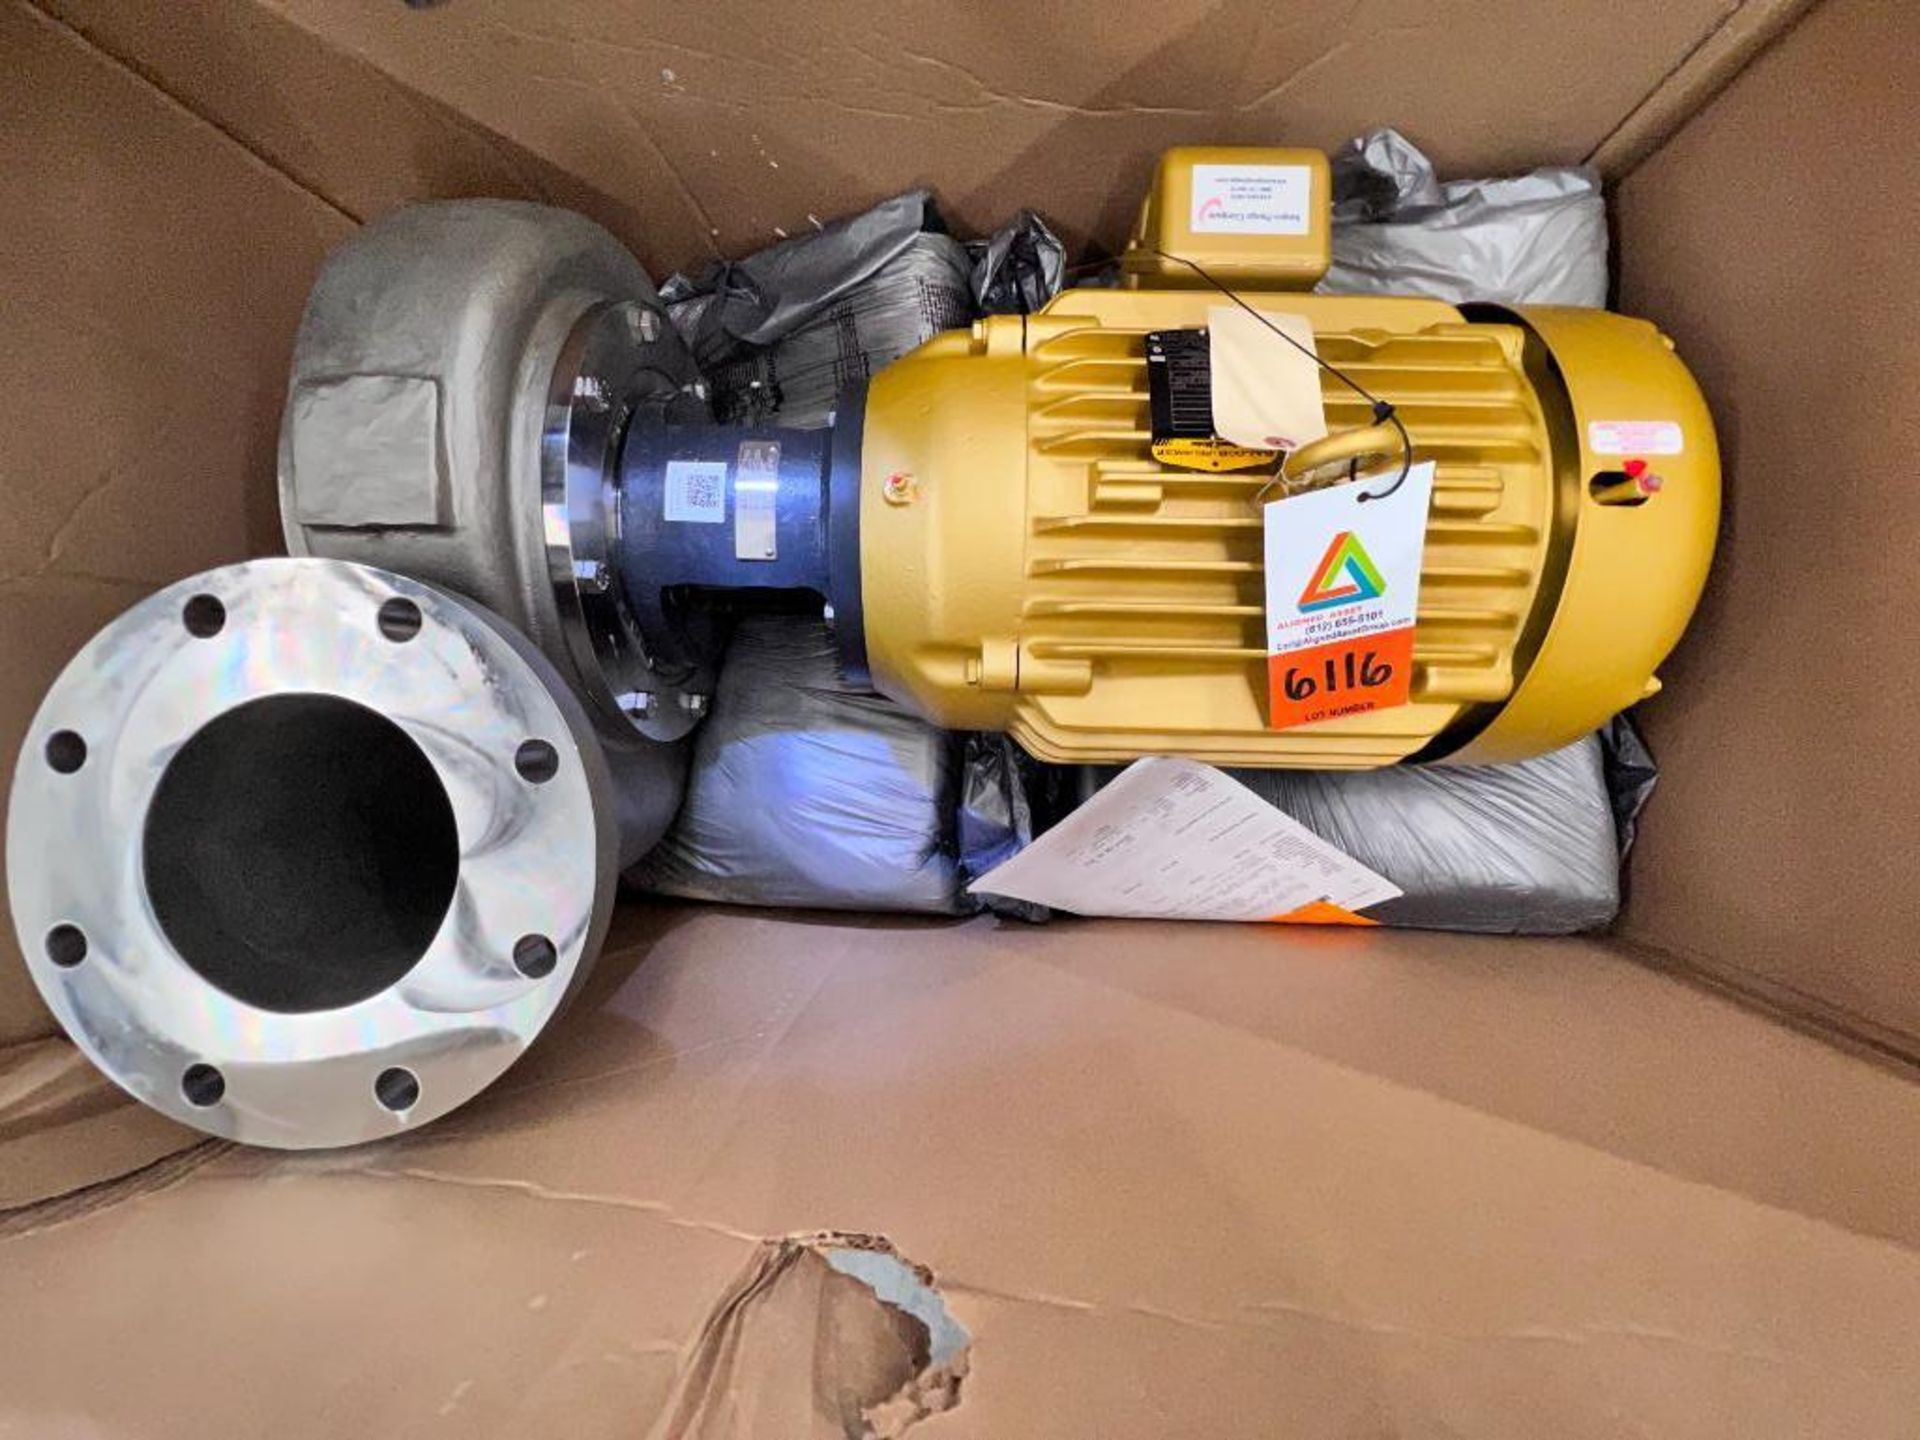 Ampco centrifugal pump, model ASZCH2-66-250, with 15 HP electric motor